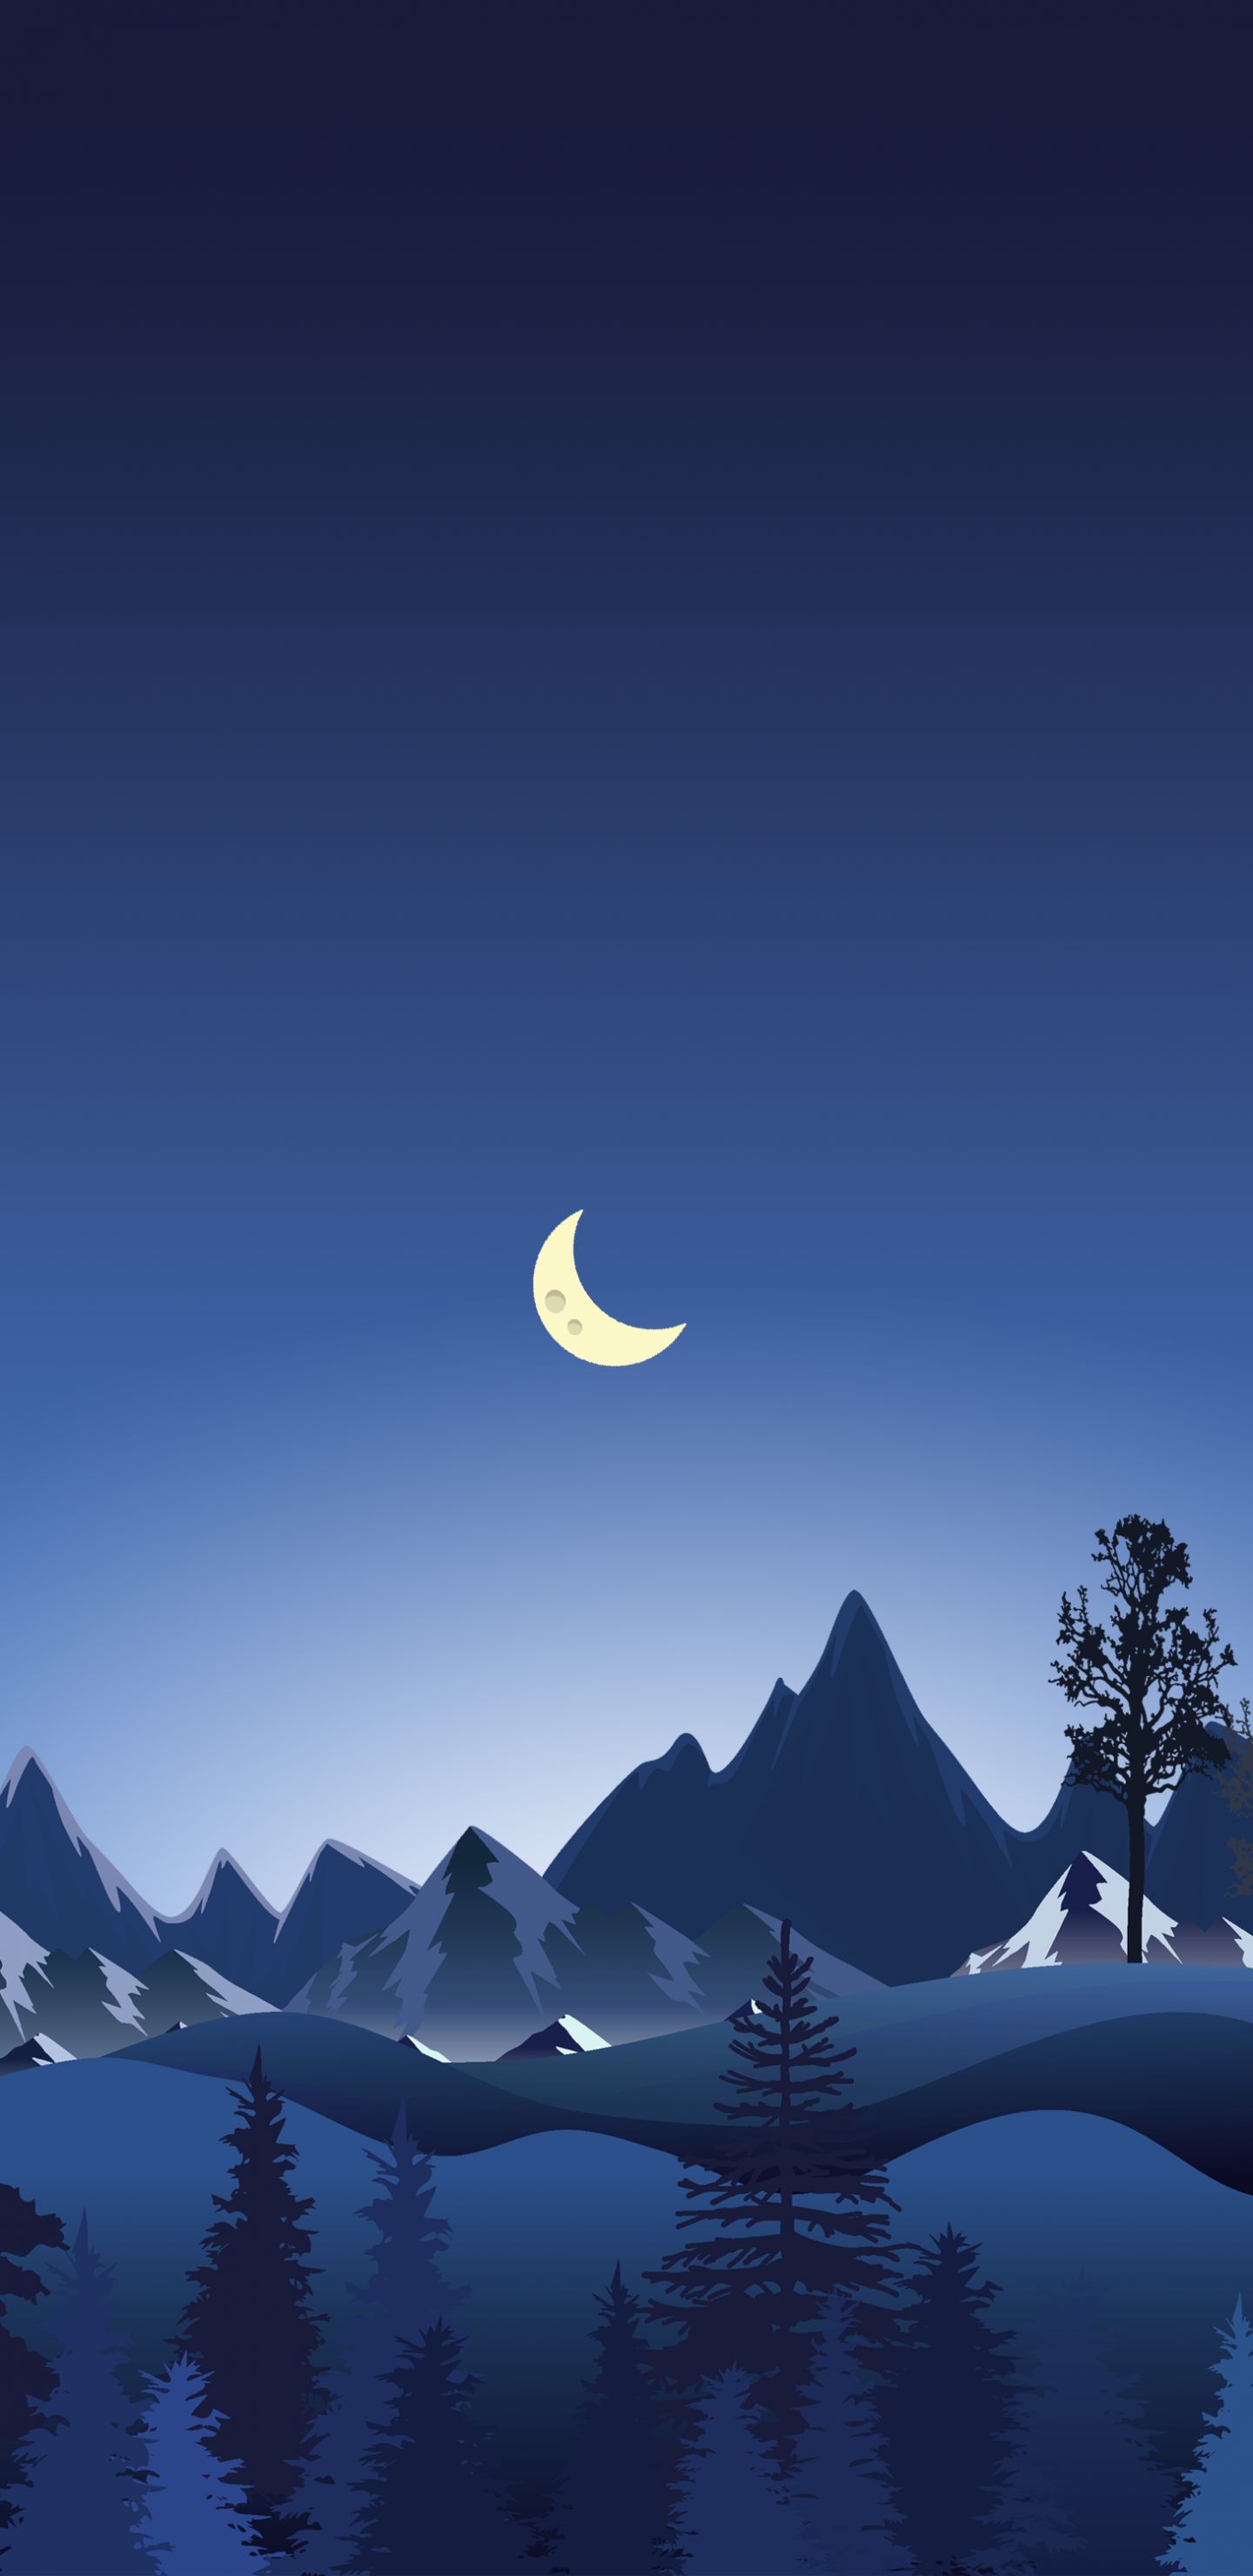 Moon Wallpaper For Samsung Galaxy S8 S8+ S9 S9+ Note 8 Note 9 QHD